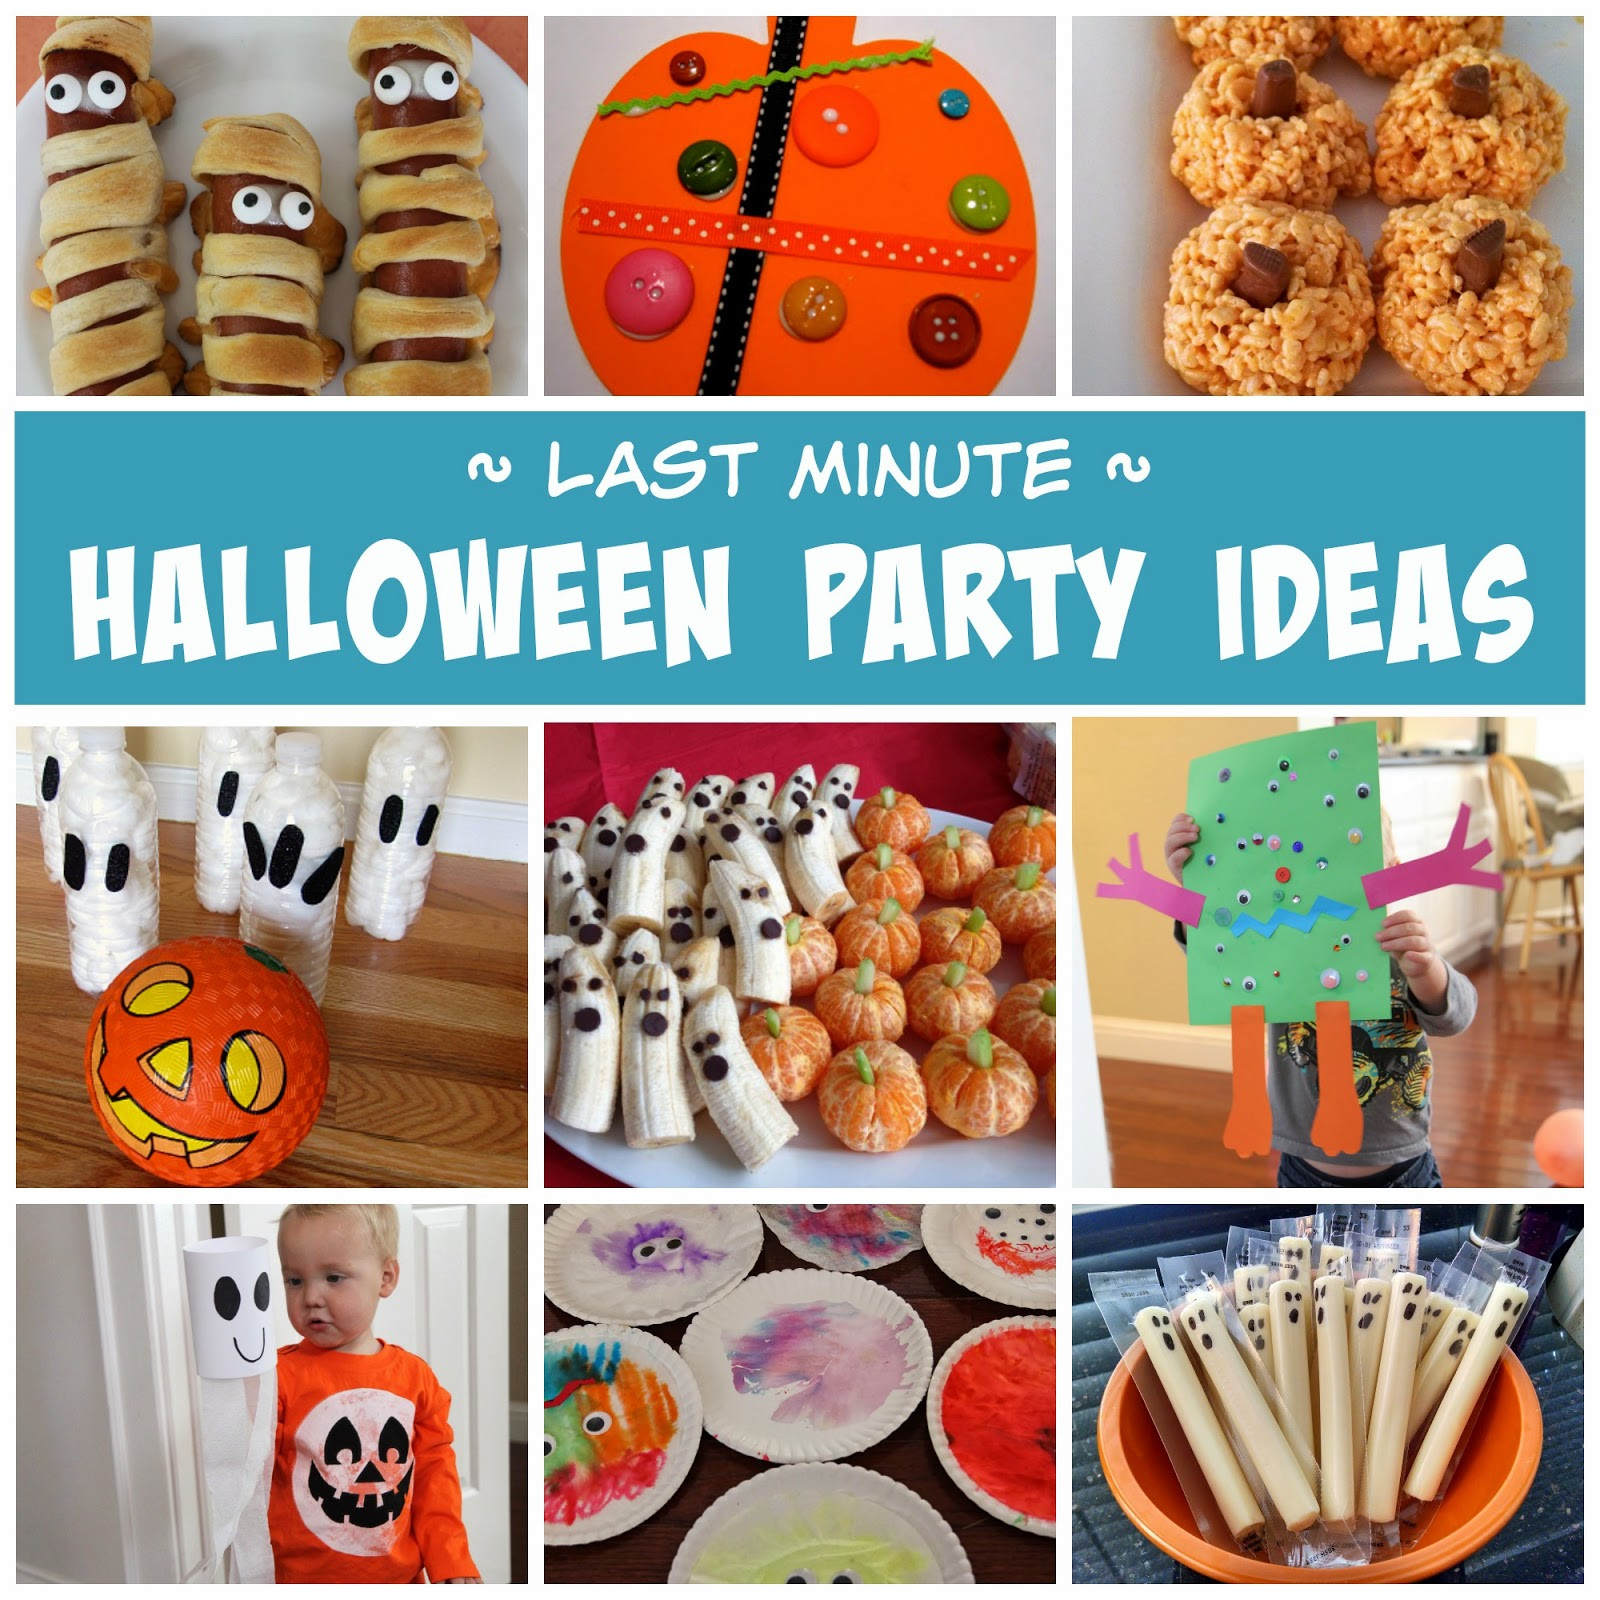 Halloween Party Ideas For Toddlers
 Toddler Approved Last Minute Halloween Party Ideas